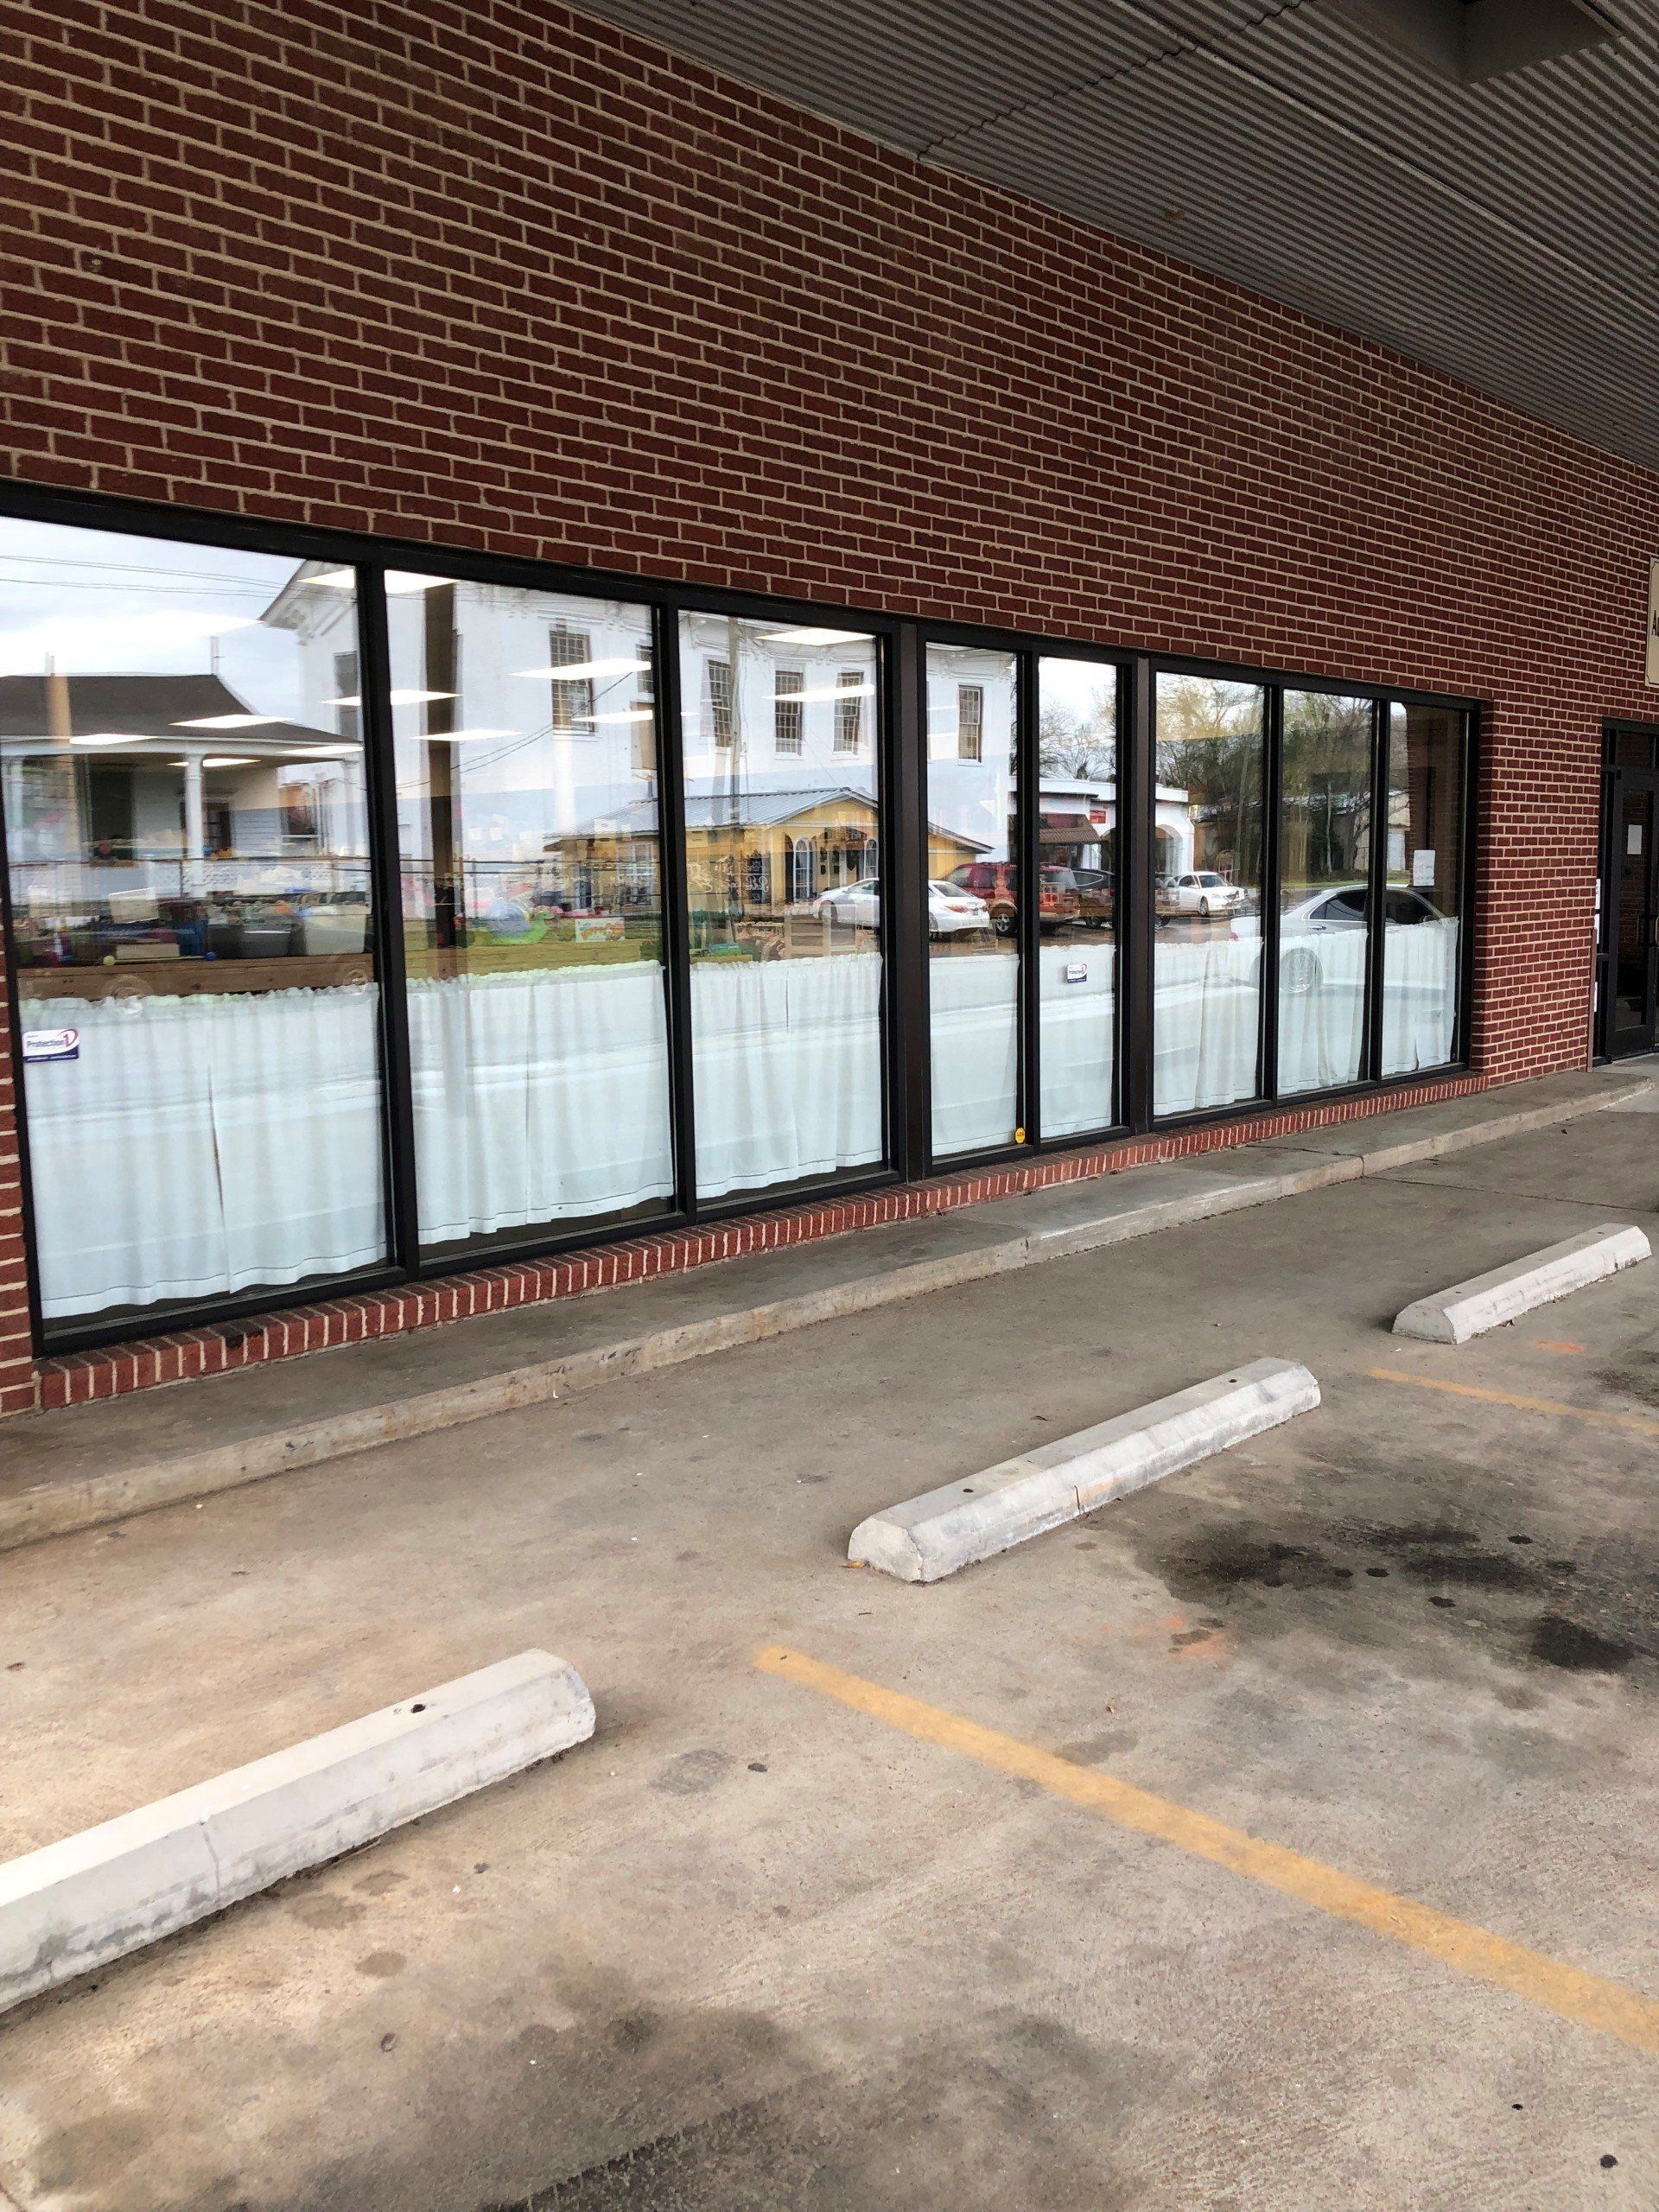 Professional window tinting in Prattville, AL - SPF White Frost really enhanced the building's appearance on 3/15/2019 in Prattville, AL